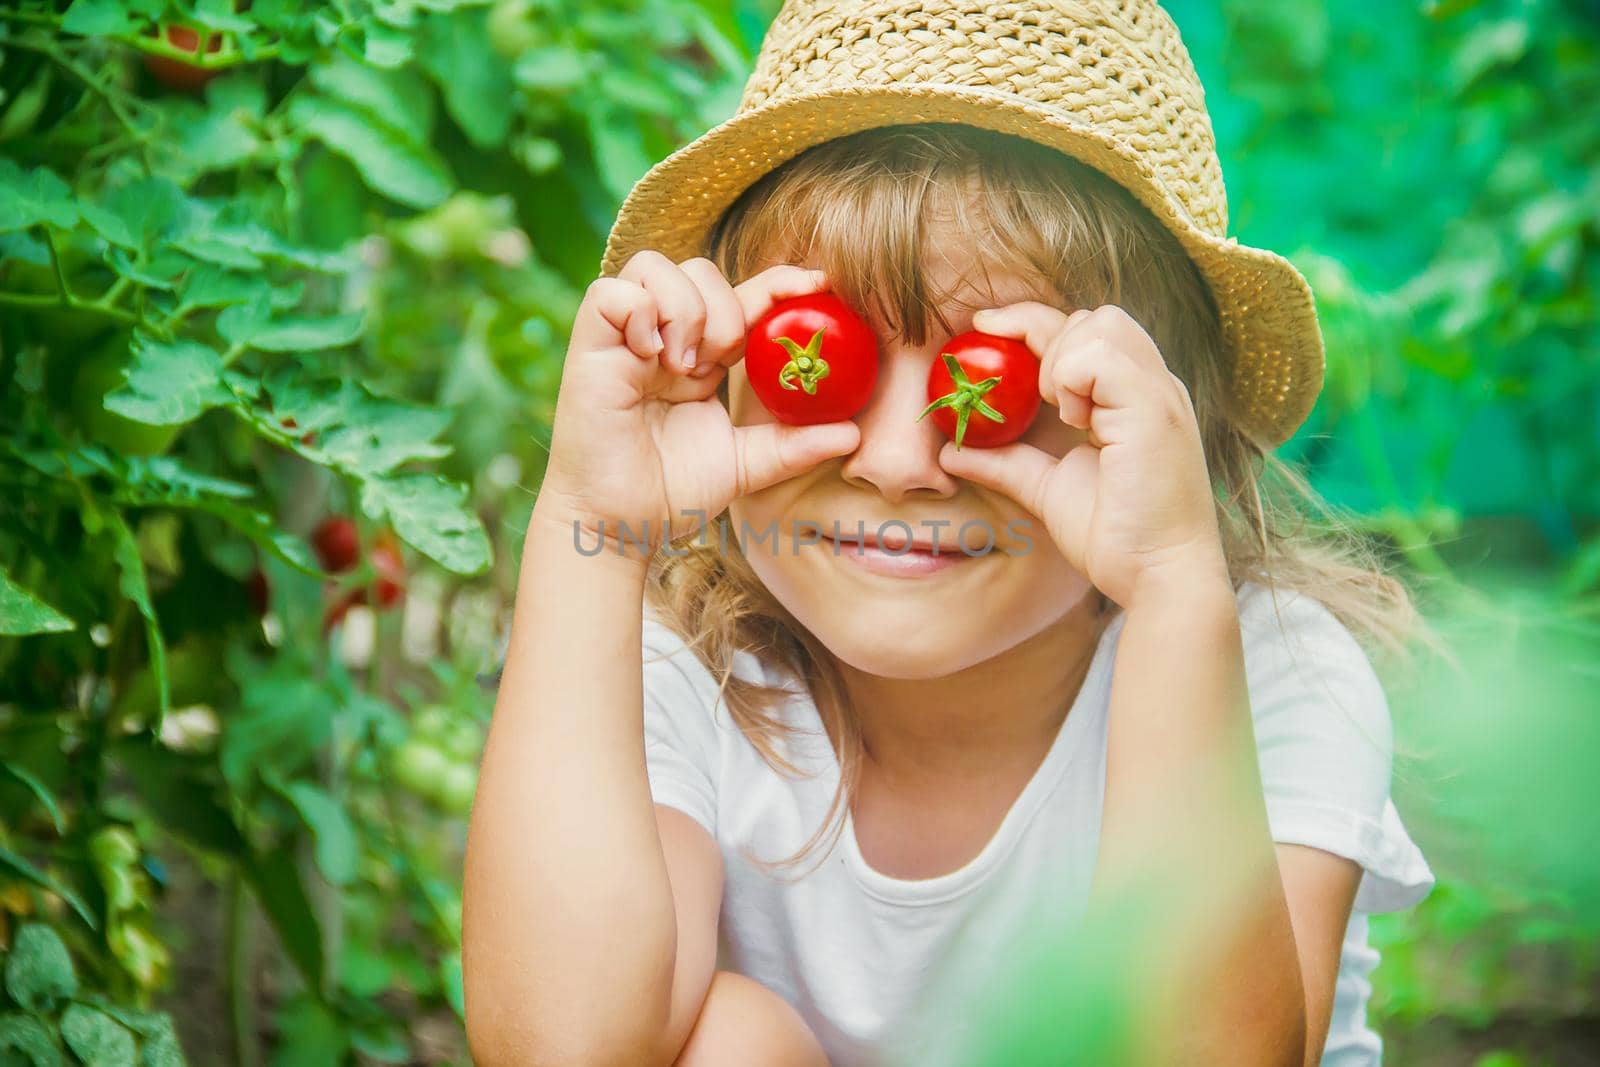 child collects a harvest of homemade tomatoes. selective focus. nature.